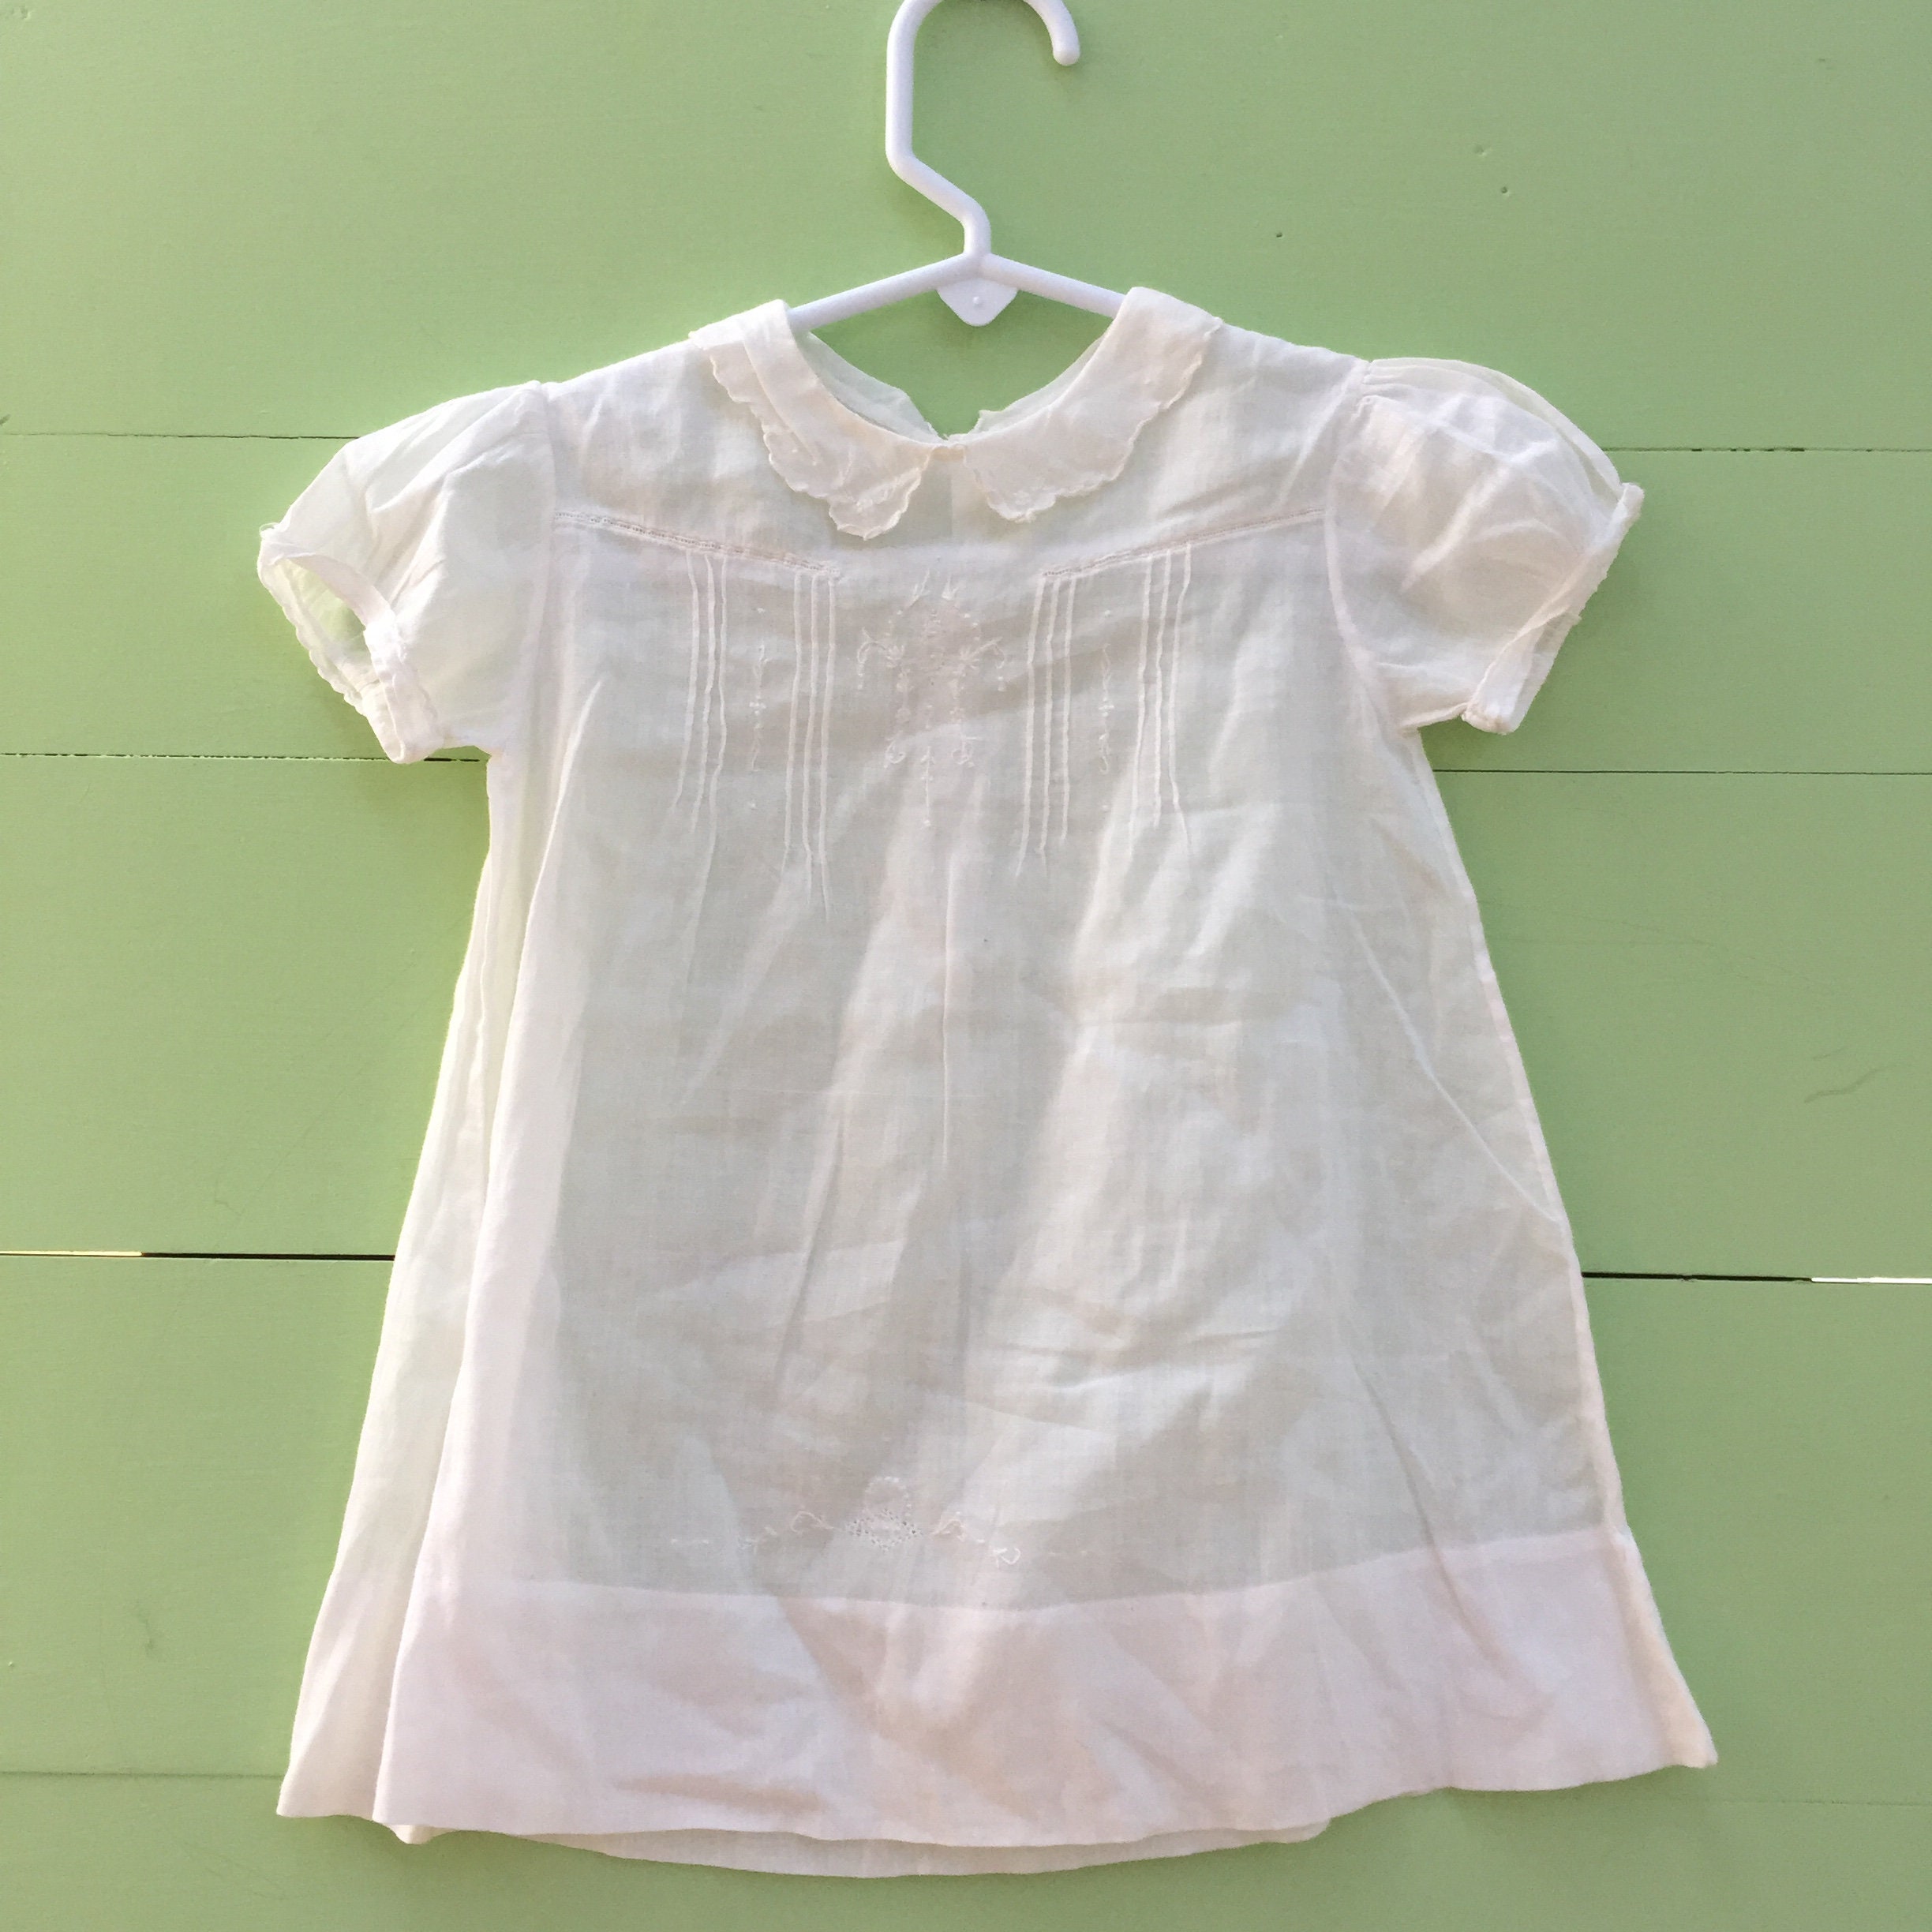 Vintage 1950s White Baby Girl Dress with Slip, Size 9 to 12 months ...